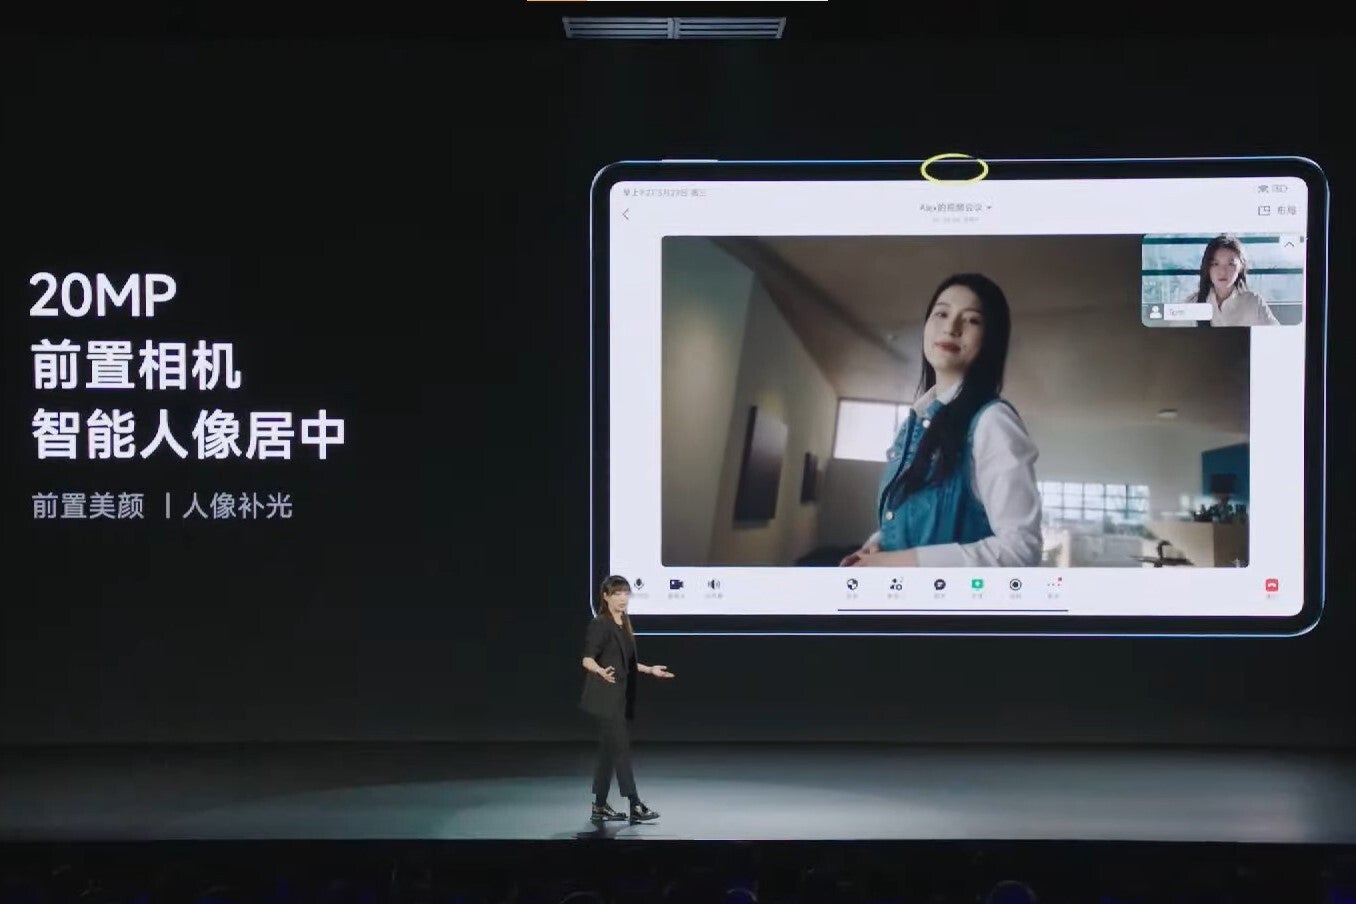 The Xiaomi Pad 6 offers improvements on all fronts without any price hike